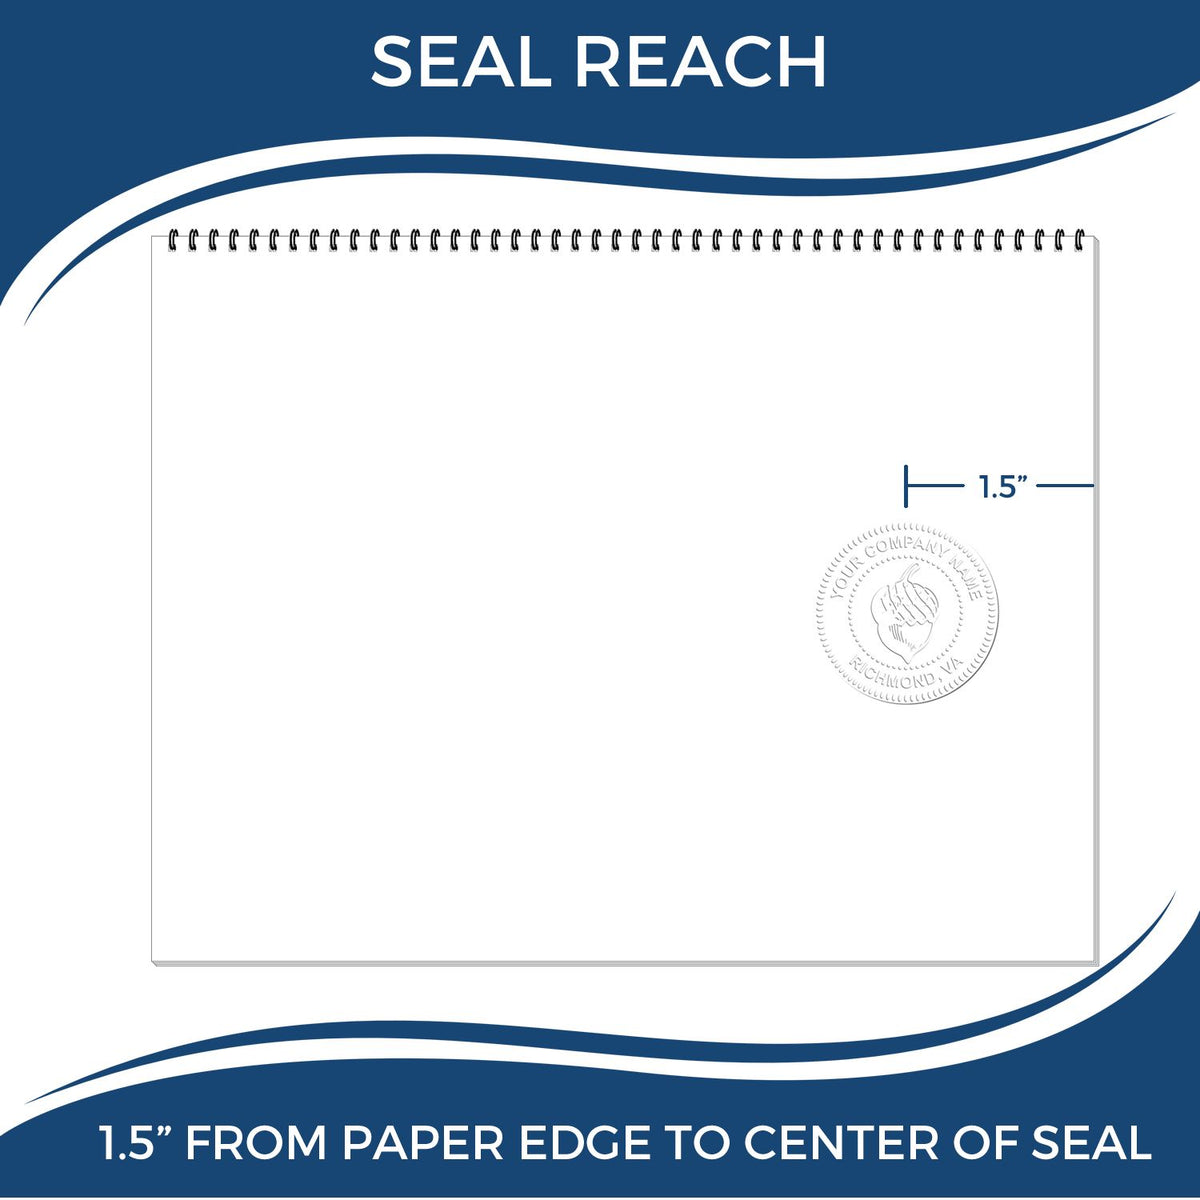 An infographic showing the seal reach which is represented by a ruler and a miniature seal image of the Louisiana Engineer Desk Seal